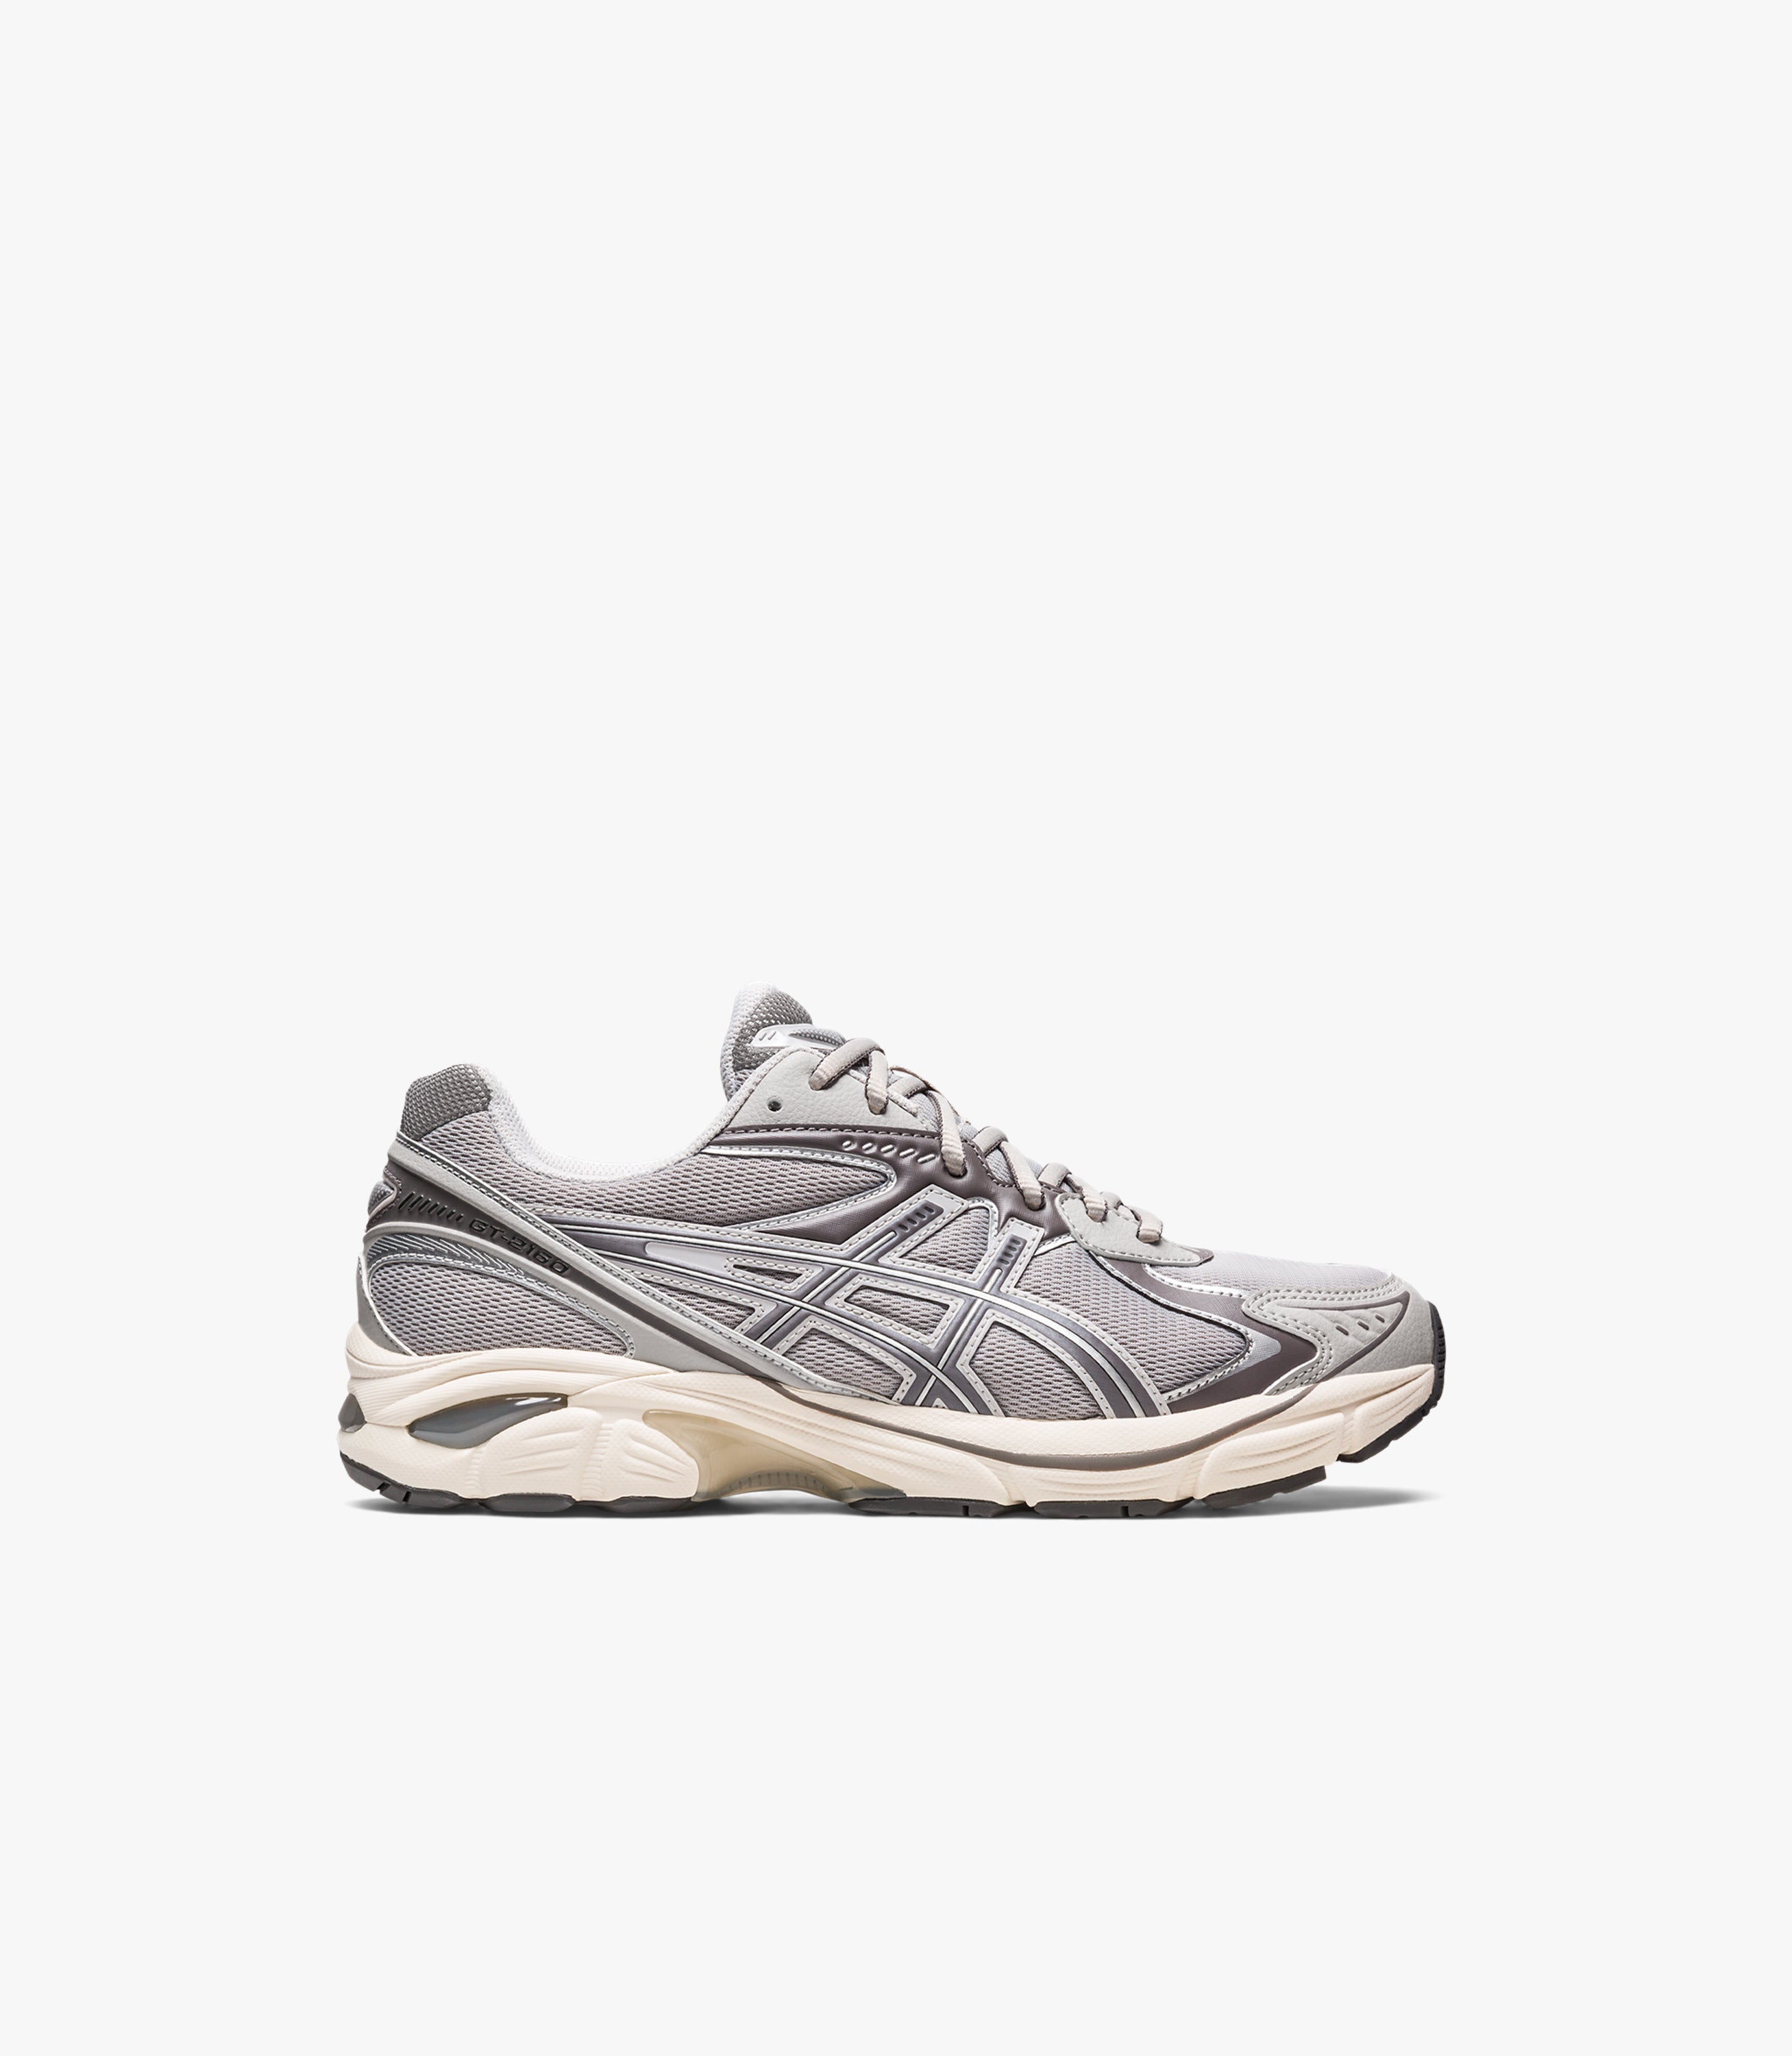 sneaker asics gt 2160 oyster grey carbon 1